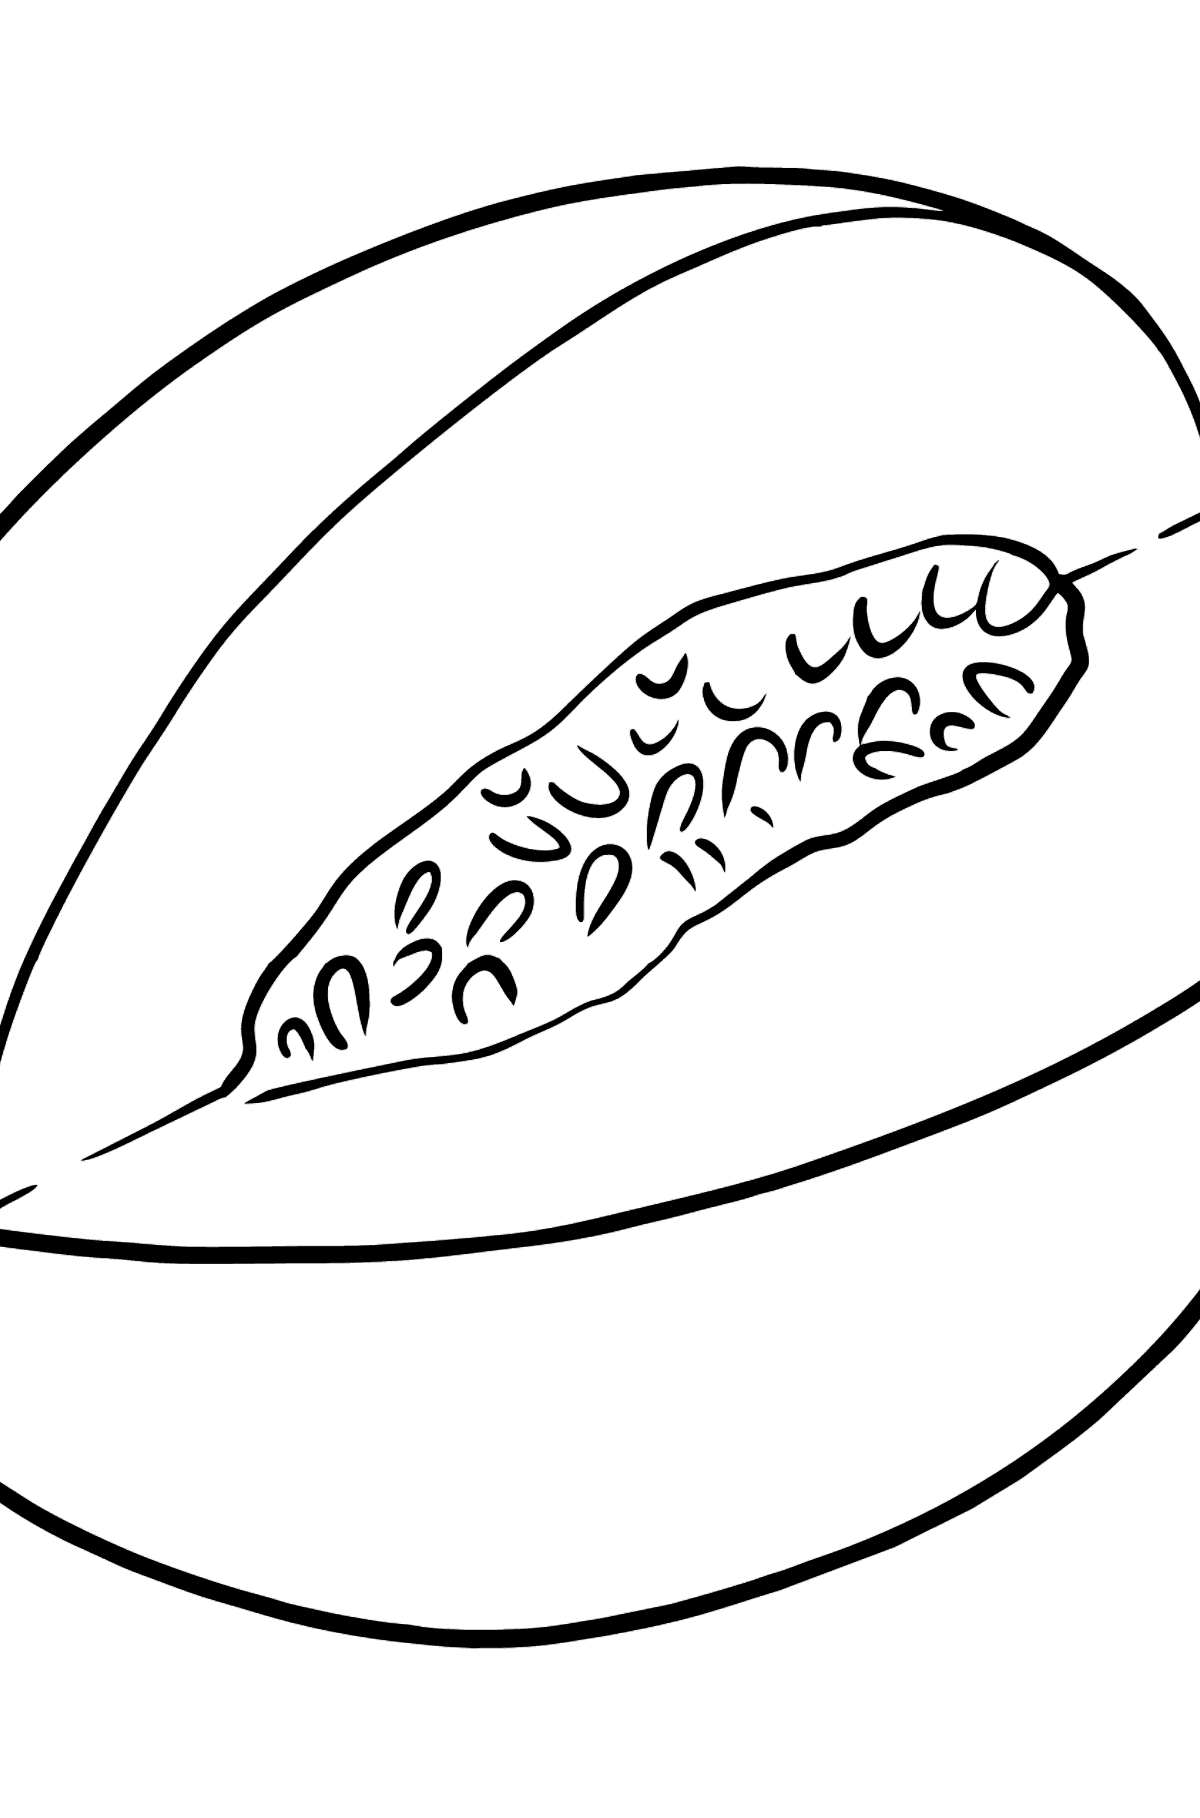 Melon coloring page - Coloring Pages for Kids